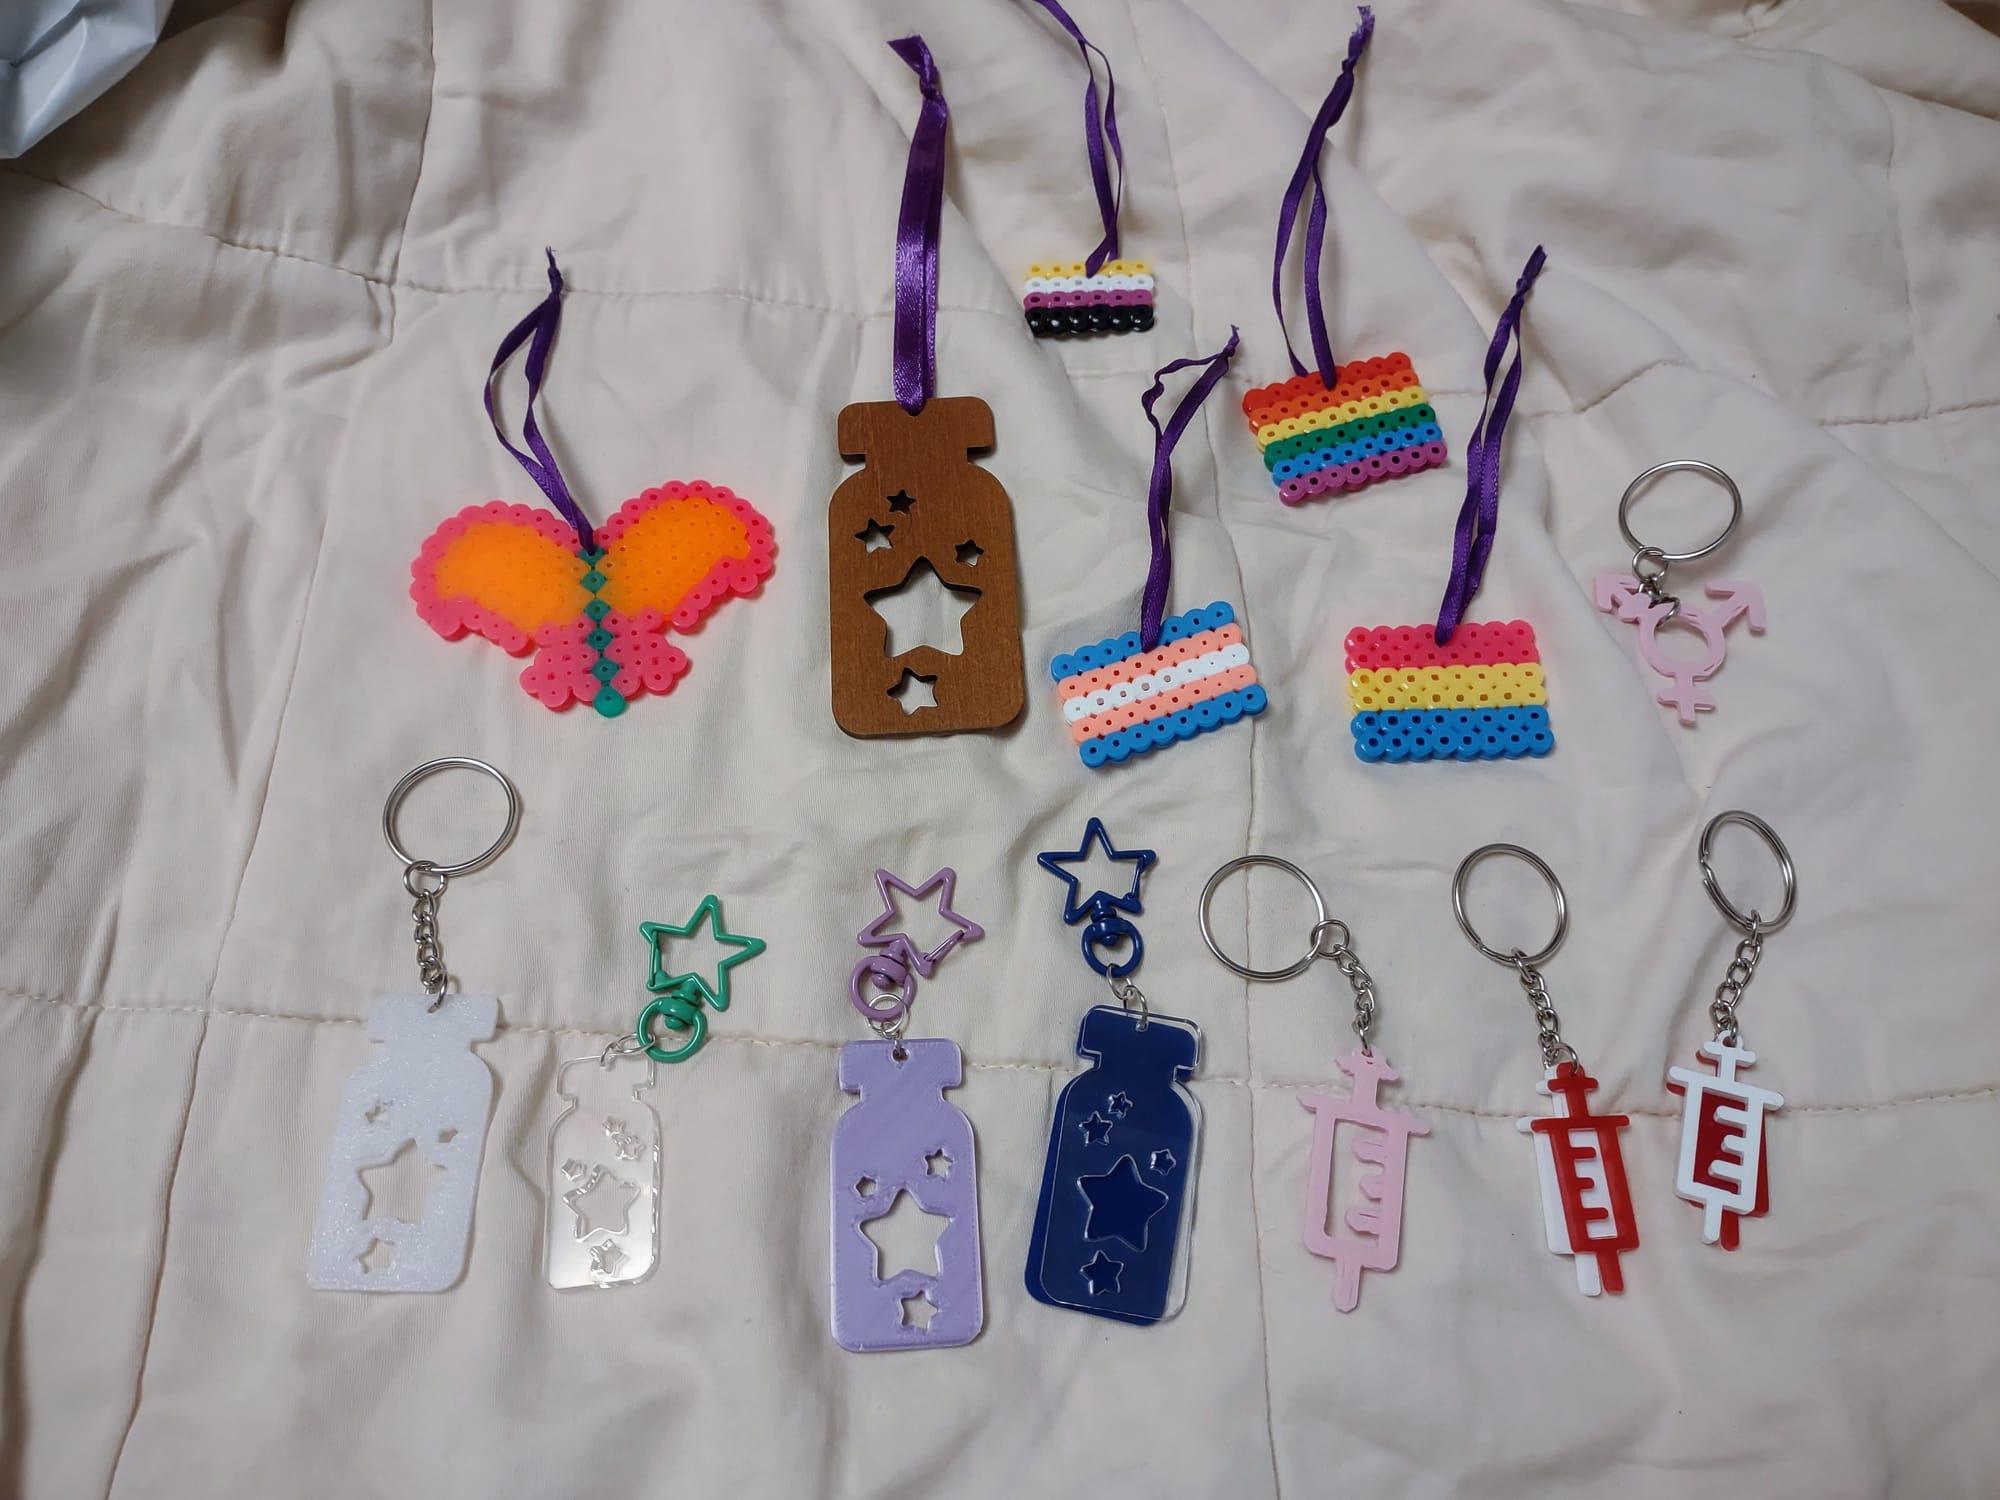 A variety of keychains and ornaments laid out on a blanket. Some are syringe designs, some are medicine vials with a star shape cut out inside, one is a trans symbol, and some are pride flags made of Perler beads.